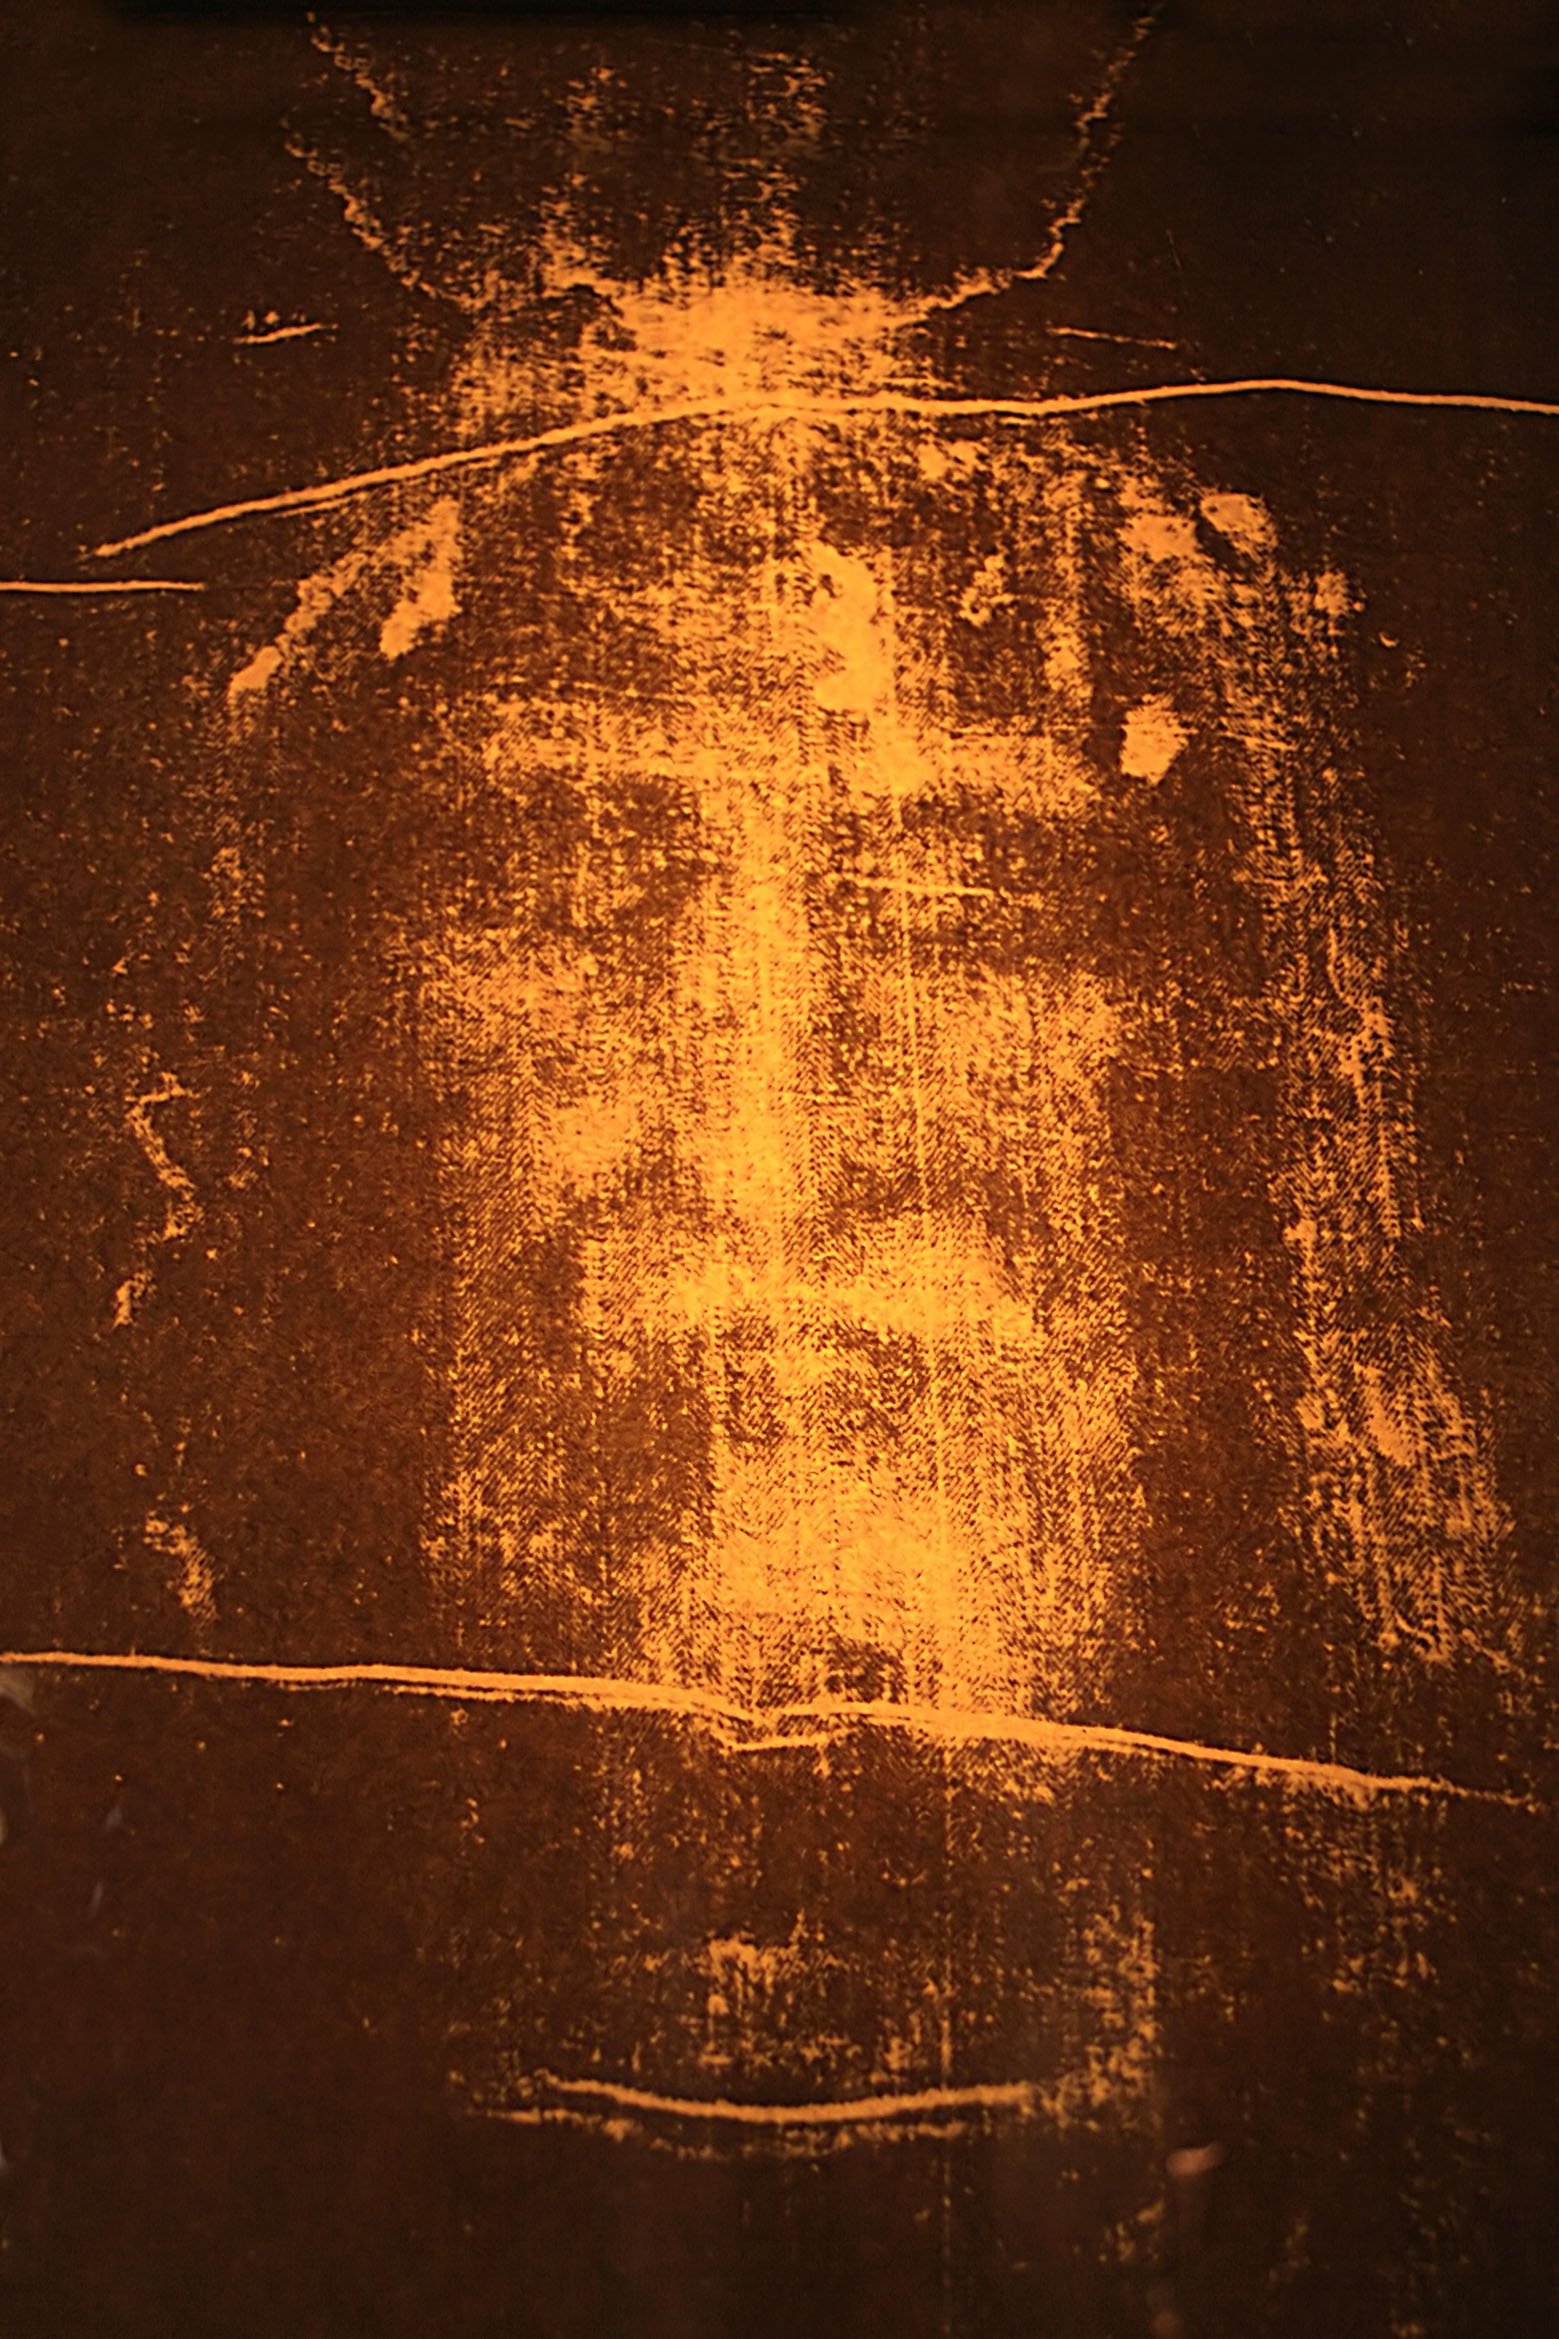 Image of Jesus Christ from the Shroud of Turin